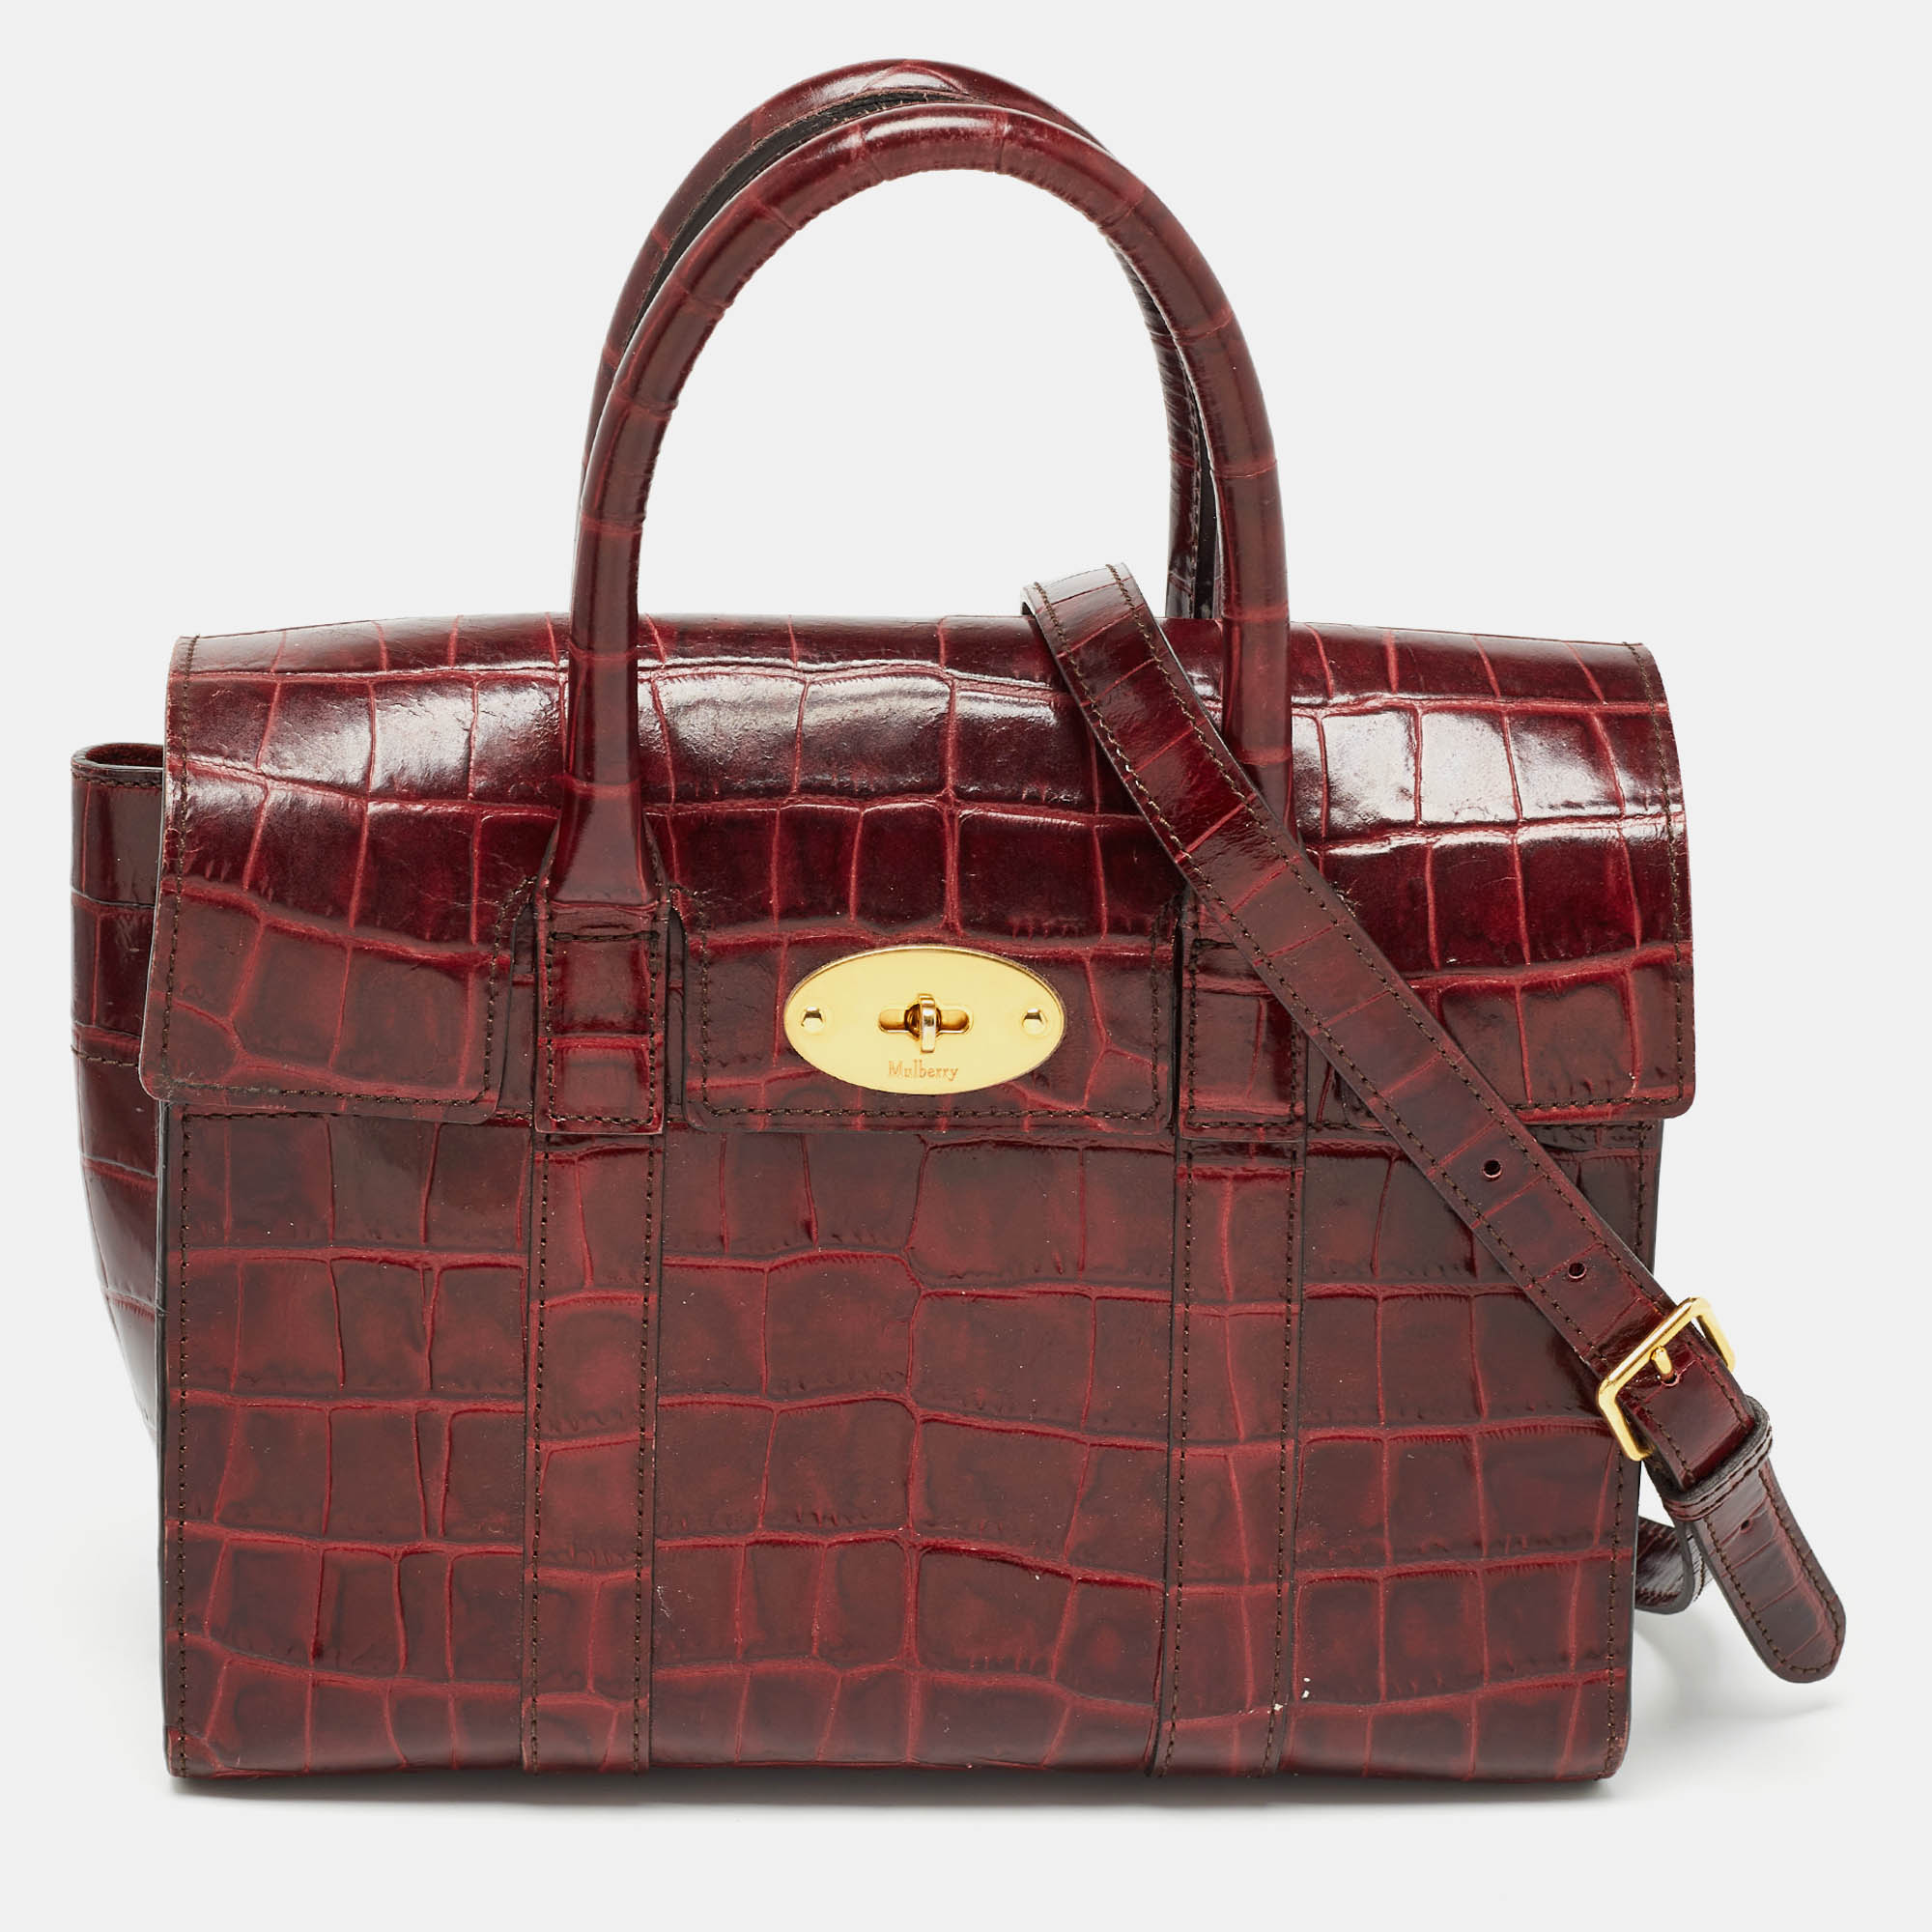 Pre-owned Mulberry Burgundy Croc Leather Small Bayswater Satchel